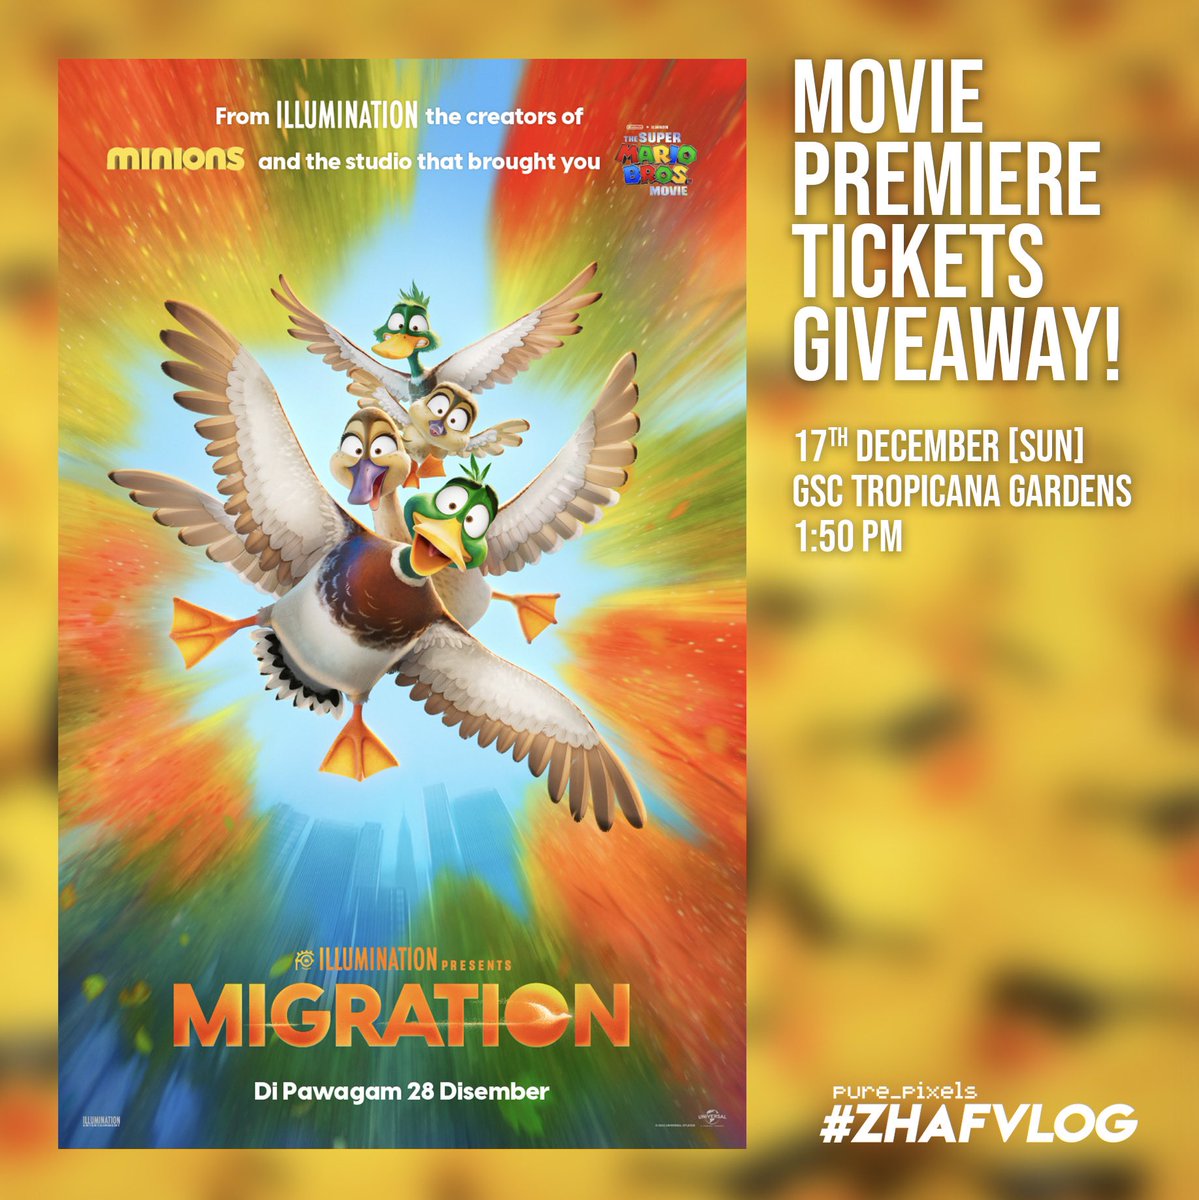 MIGRATION Movie Premiere Tickets Giveaway! forms.gle/TYich5HkxtjSUi… #ZHAFVLOG #MulutPuakaGiveaway #MulutPuakaPremiere #MigrationMovie